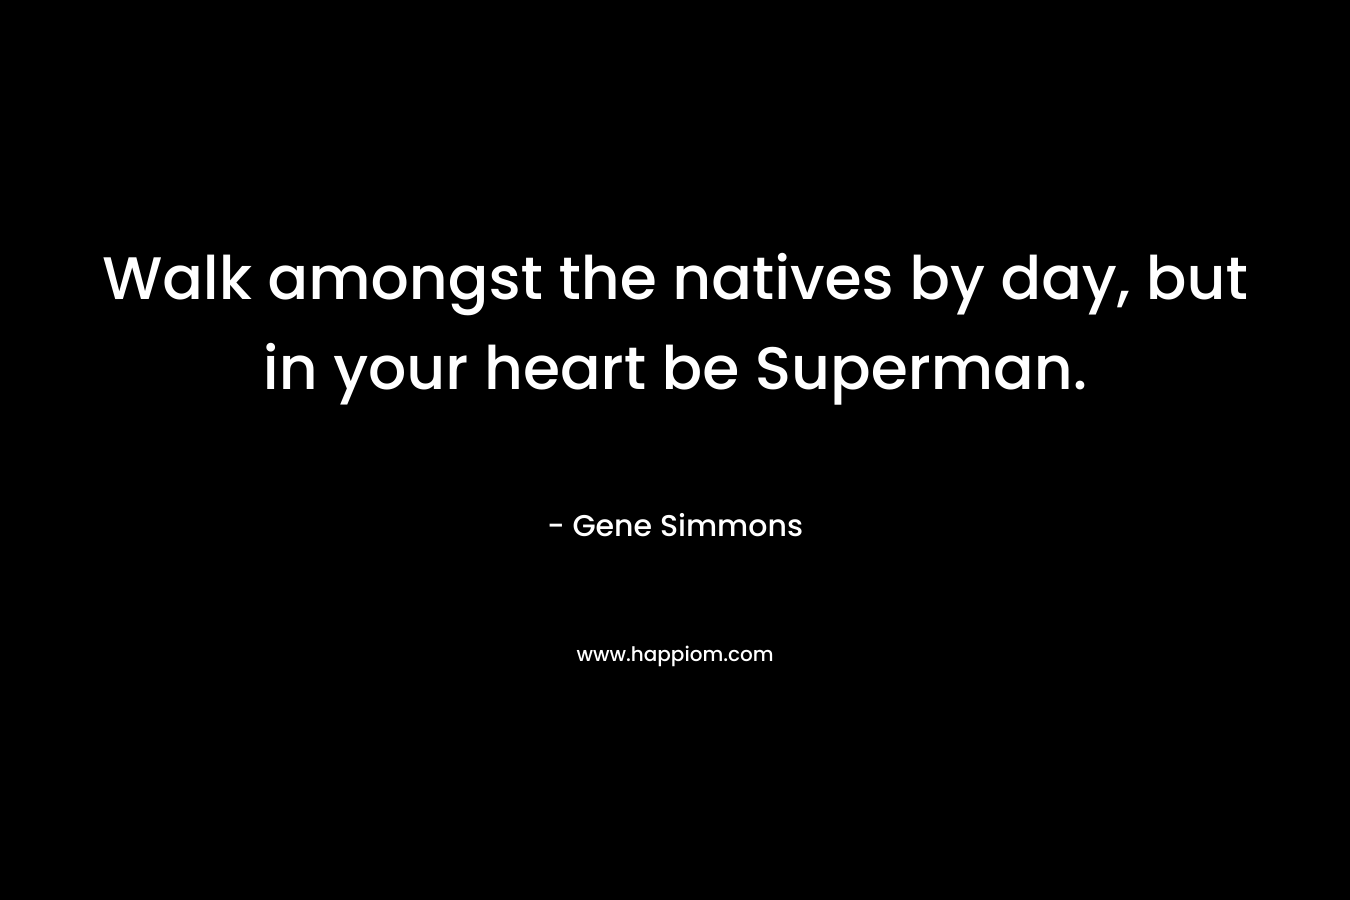 Walk amongst the natives by day, but in your heart be Superman. – Gene Simmons